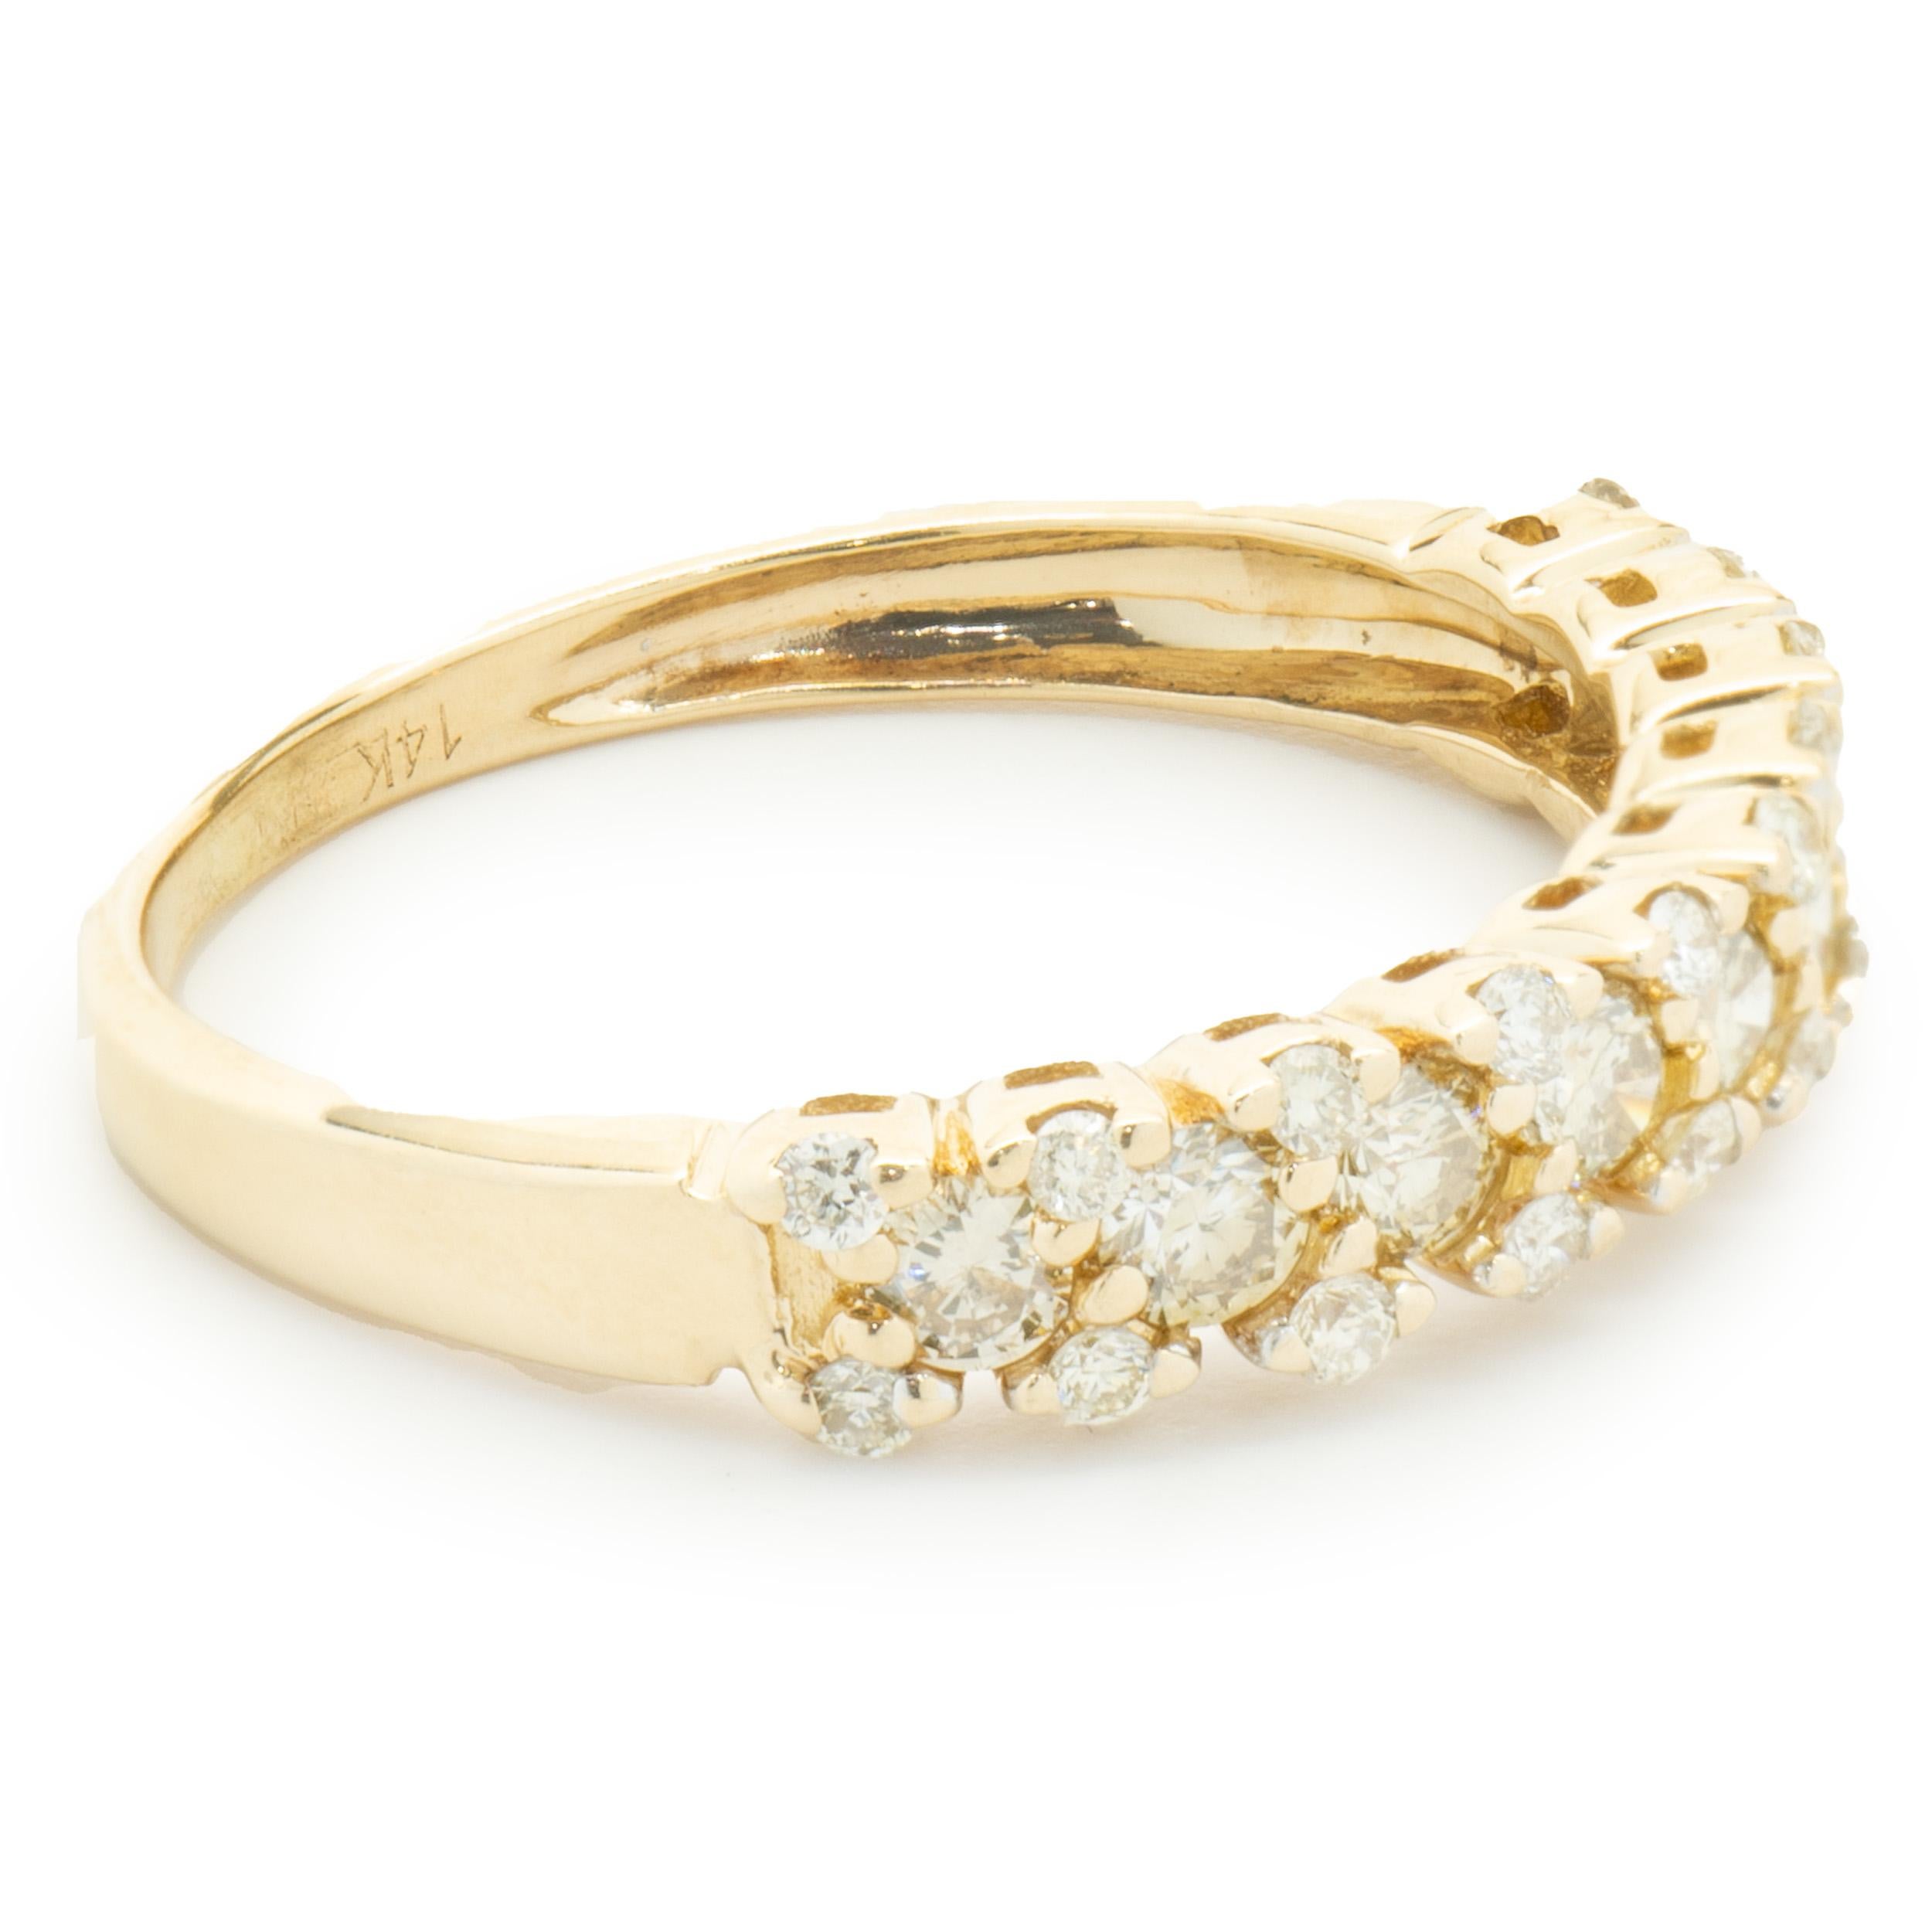 Designer: custom
Material: 14k yellow gold
Diamonds: 9 round cut = .27cttw
Color: Champagne
Diamonds: 20 round cut = .20cttw
Color: H
Clarity: SI1
Size: 5.75 (please allow two additional shipping days for sizing requests)  
Dimensions: ring measures